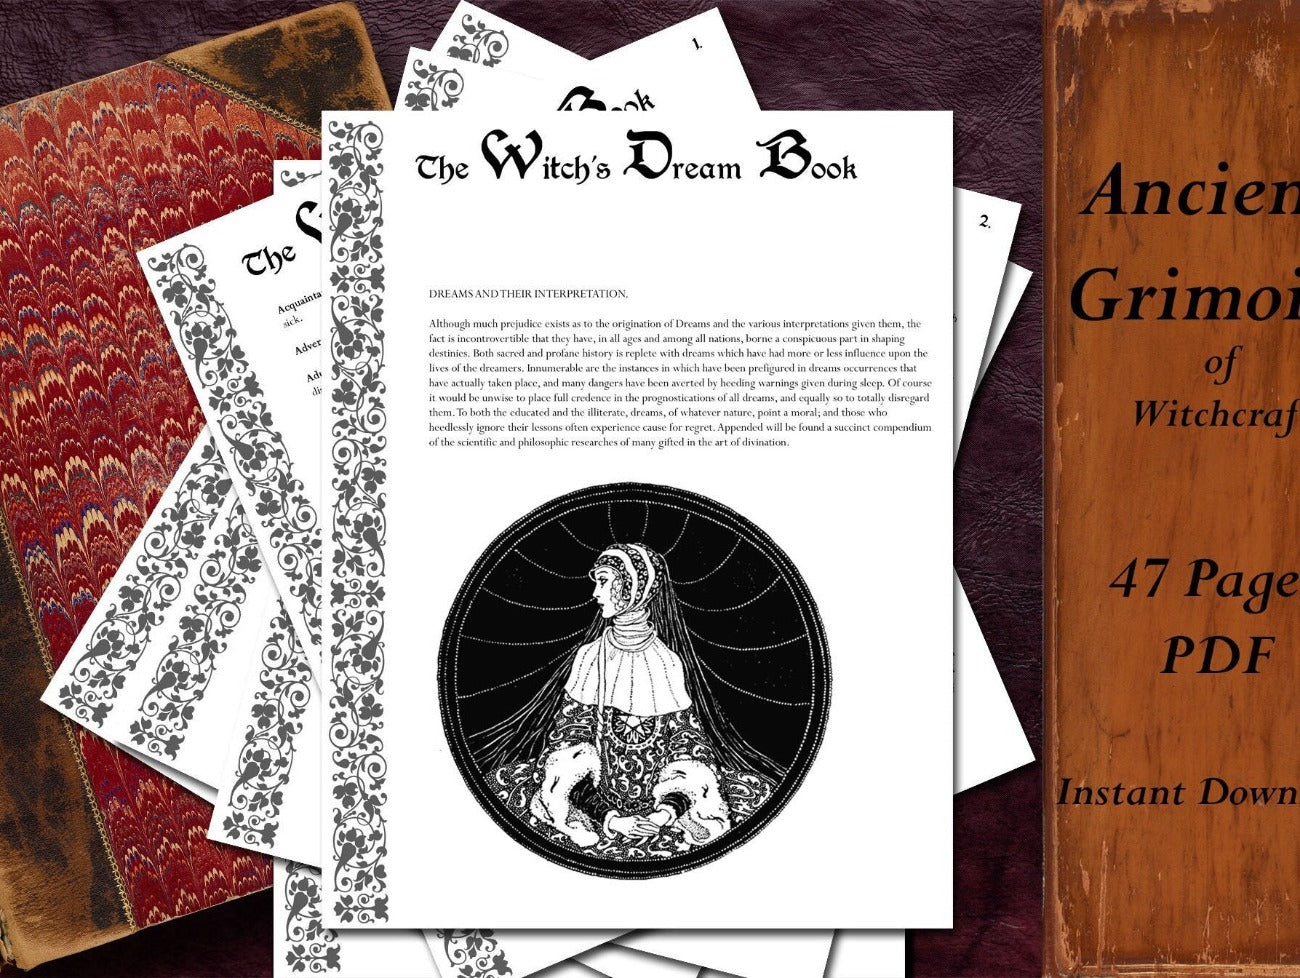 WITCHS DREAM BOOK, From 300 year old Grimore, Wicca Witchcraft, Instant Download, Lucid Dreams, Dream Guide Interpretations, 47 Pages - Morgana Magick Spell